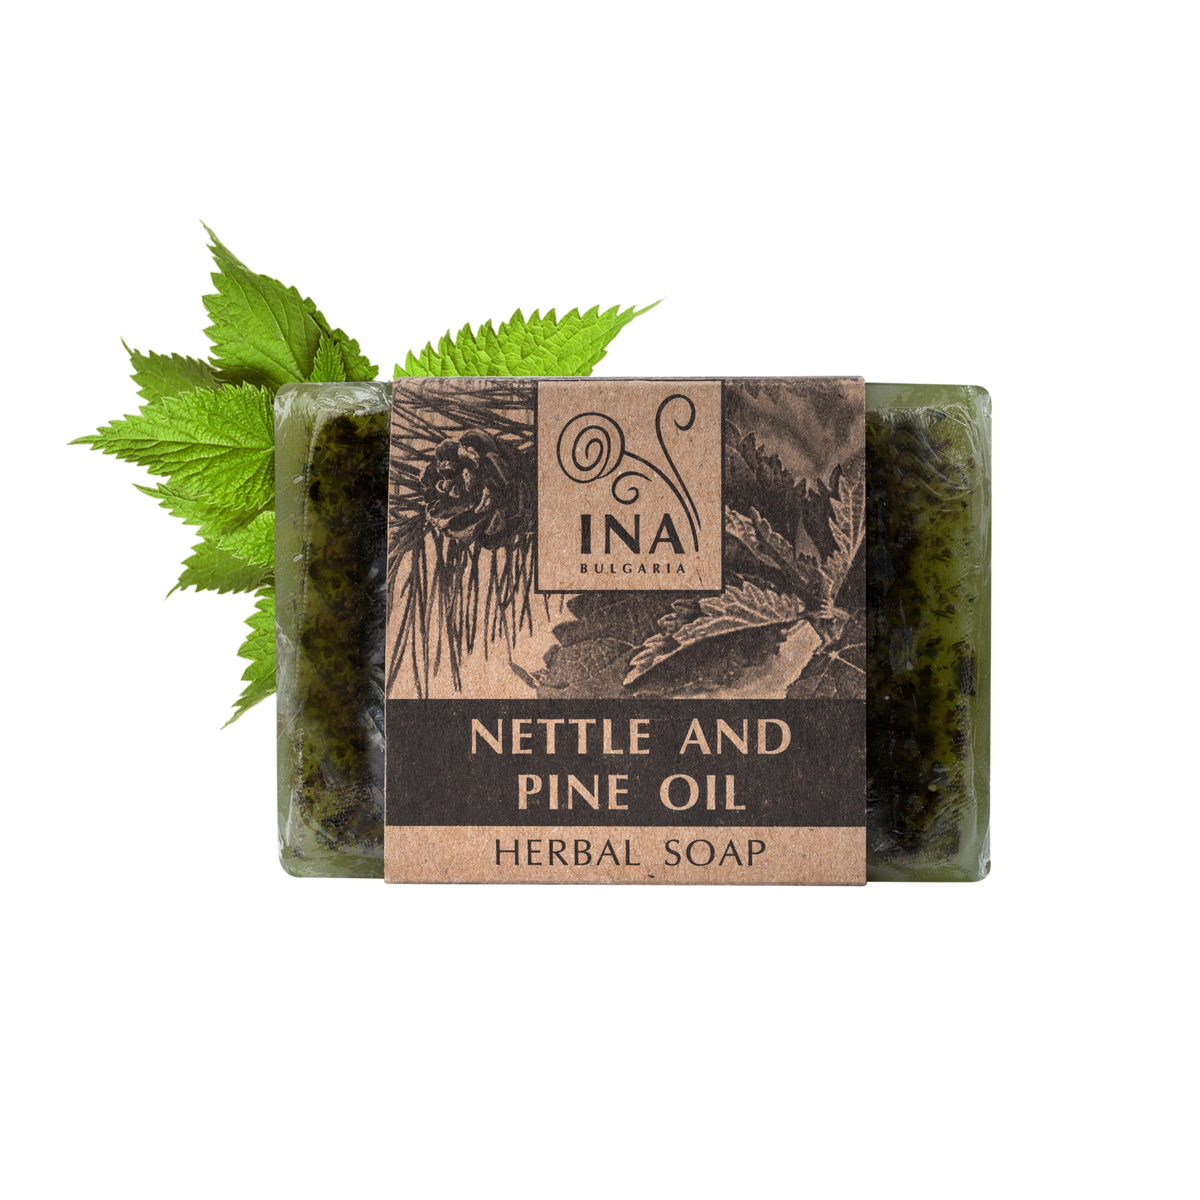 100% Herbal Soap- Nettle and Pine Oil